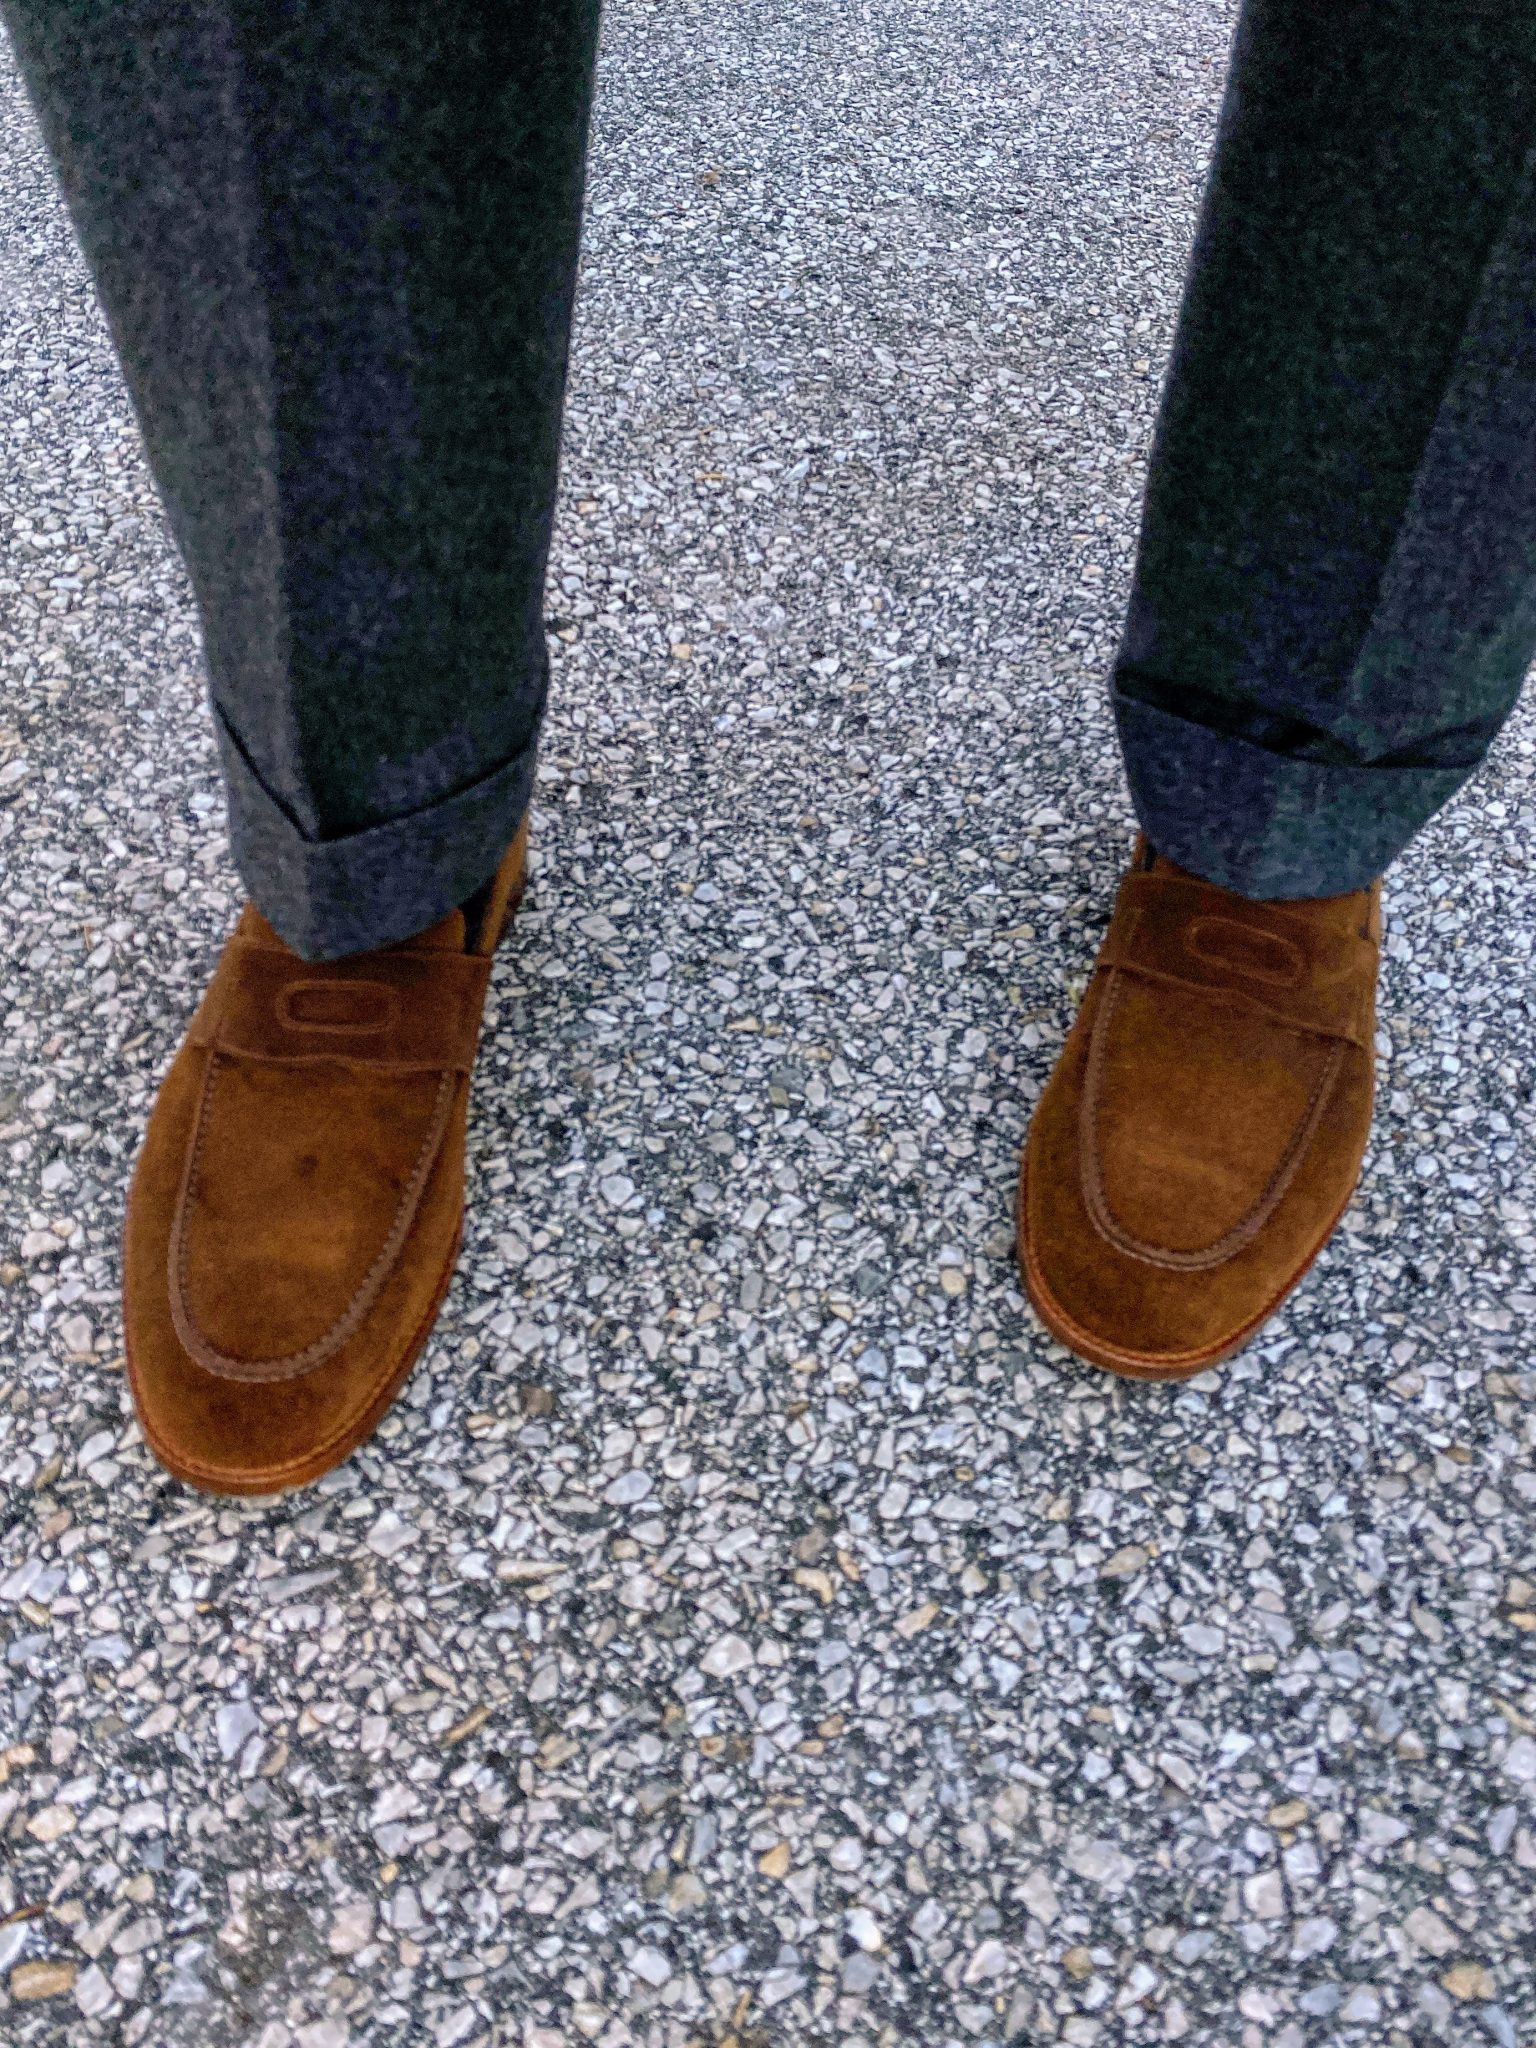 https://tailorandbarber.com/wp-content/uploads/2019/11/How-to-Style-Suede-Loafers-with-Beckett-Simonon-1-scaled.jpg